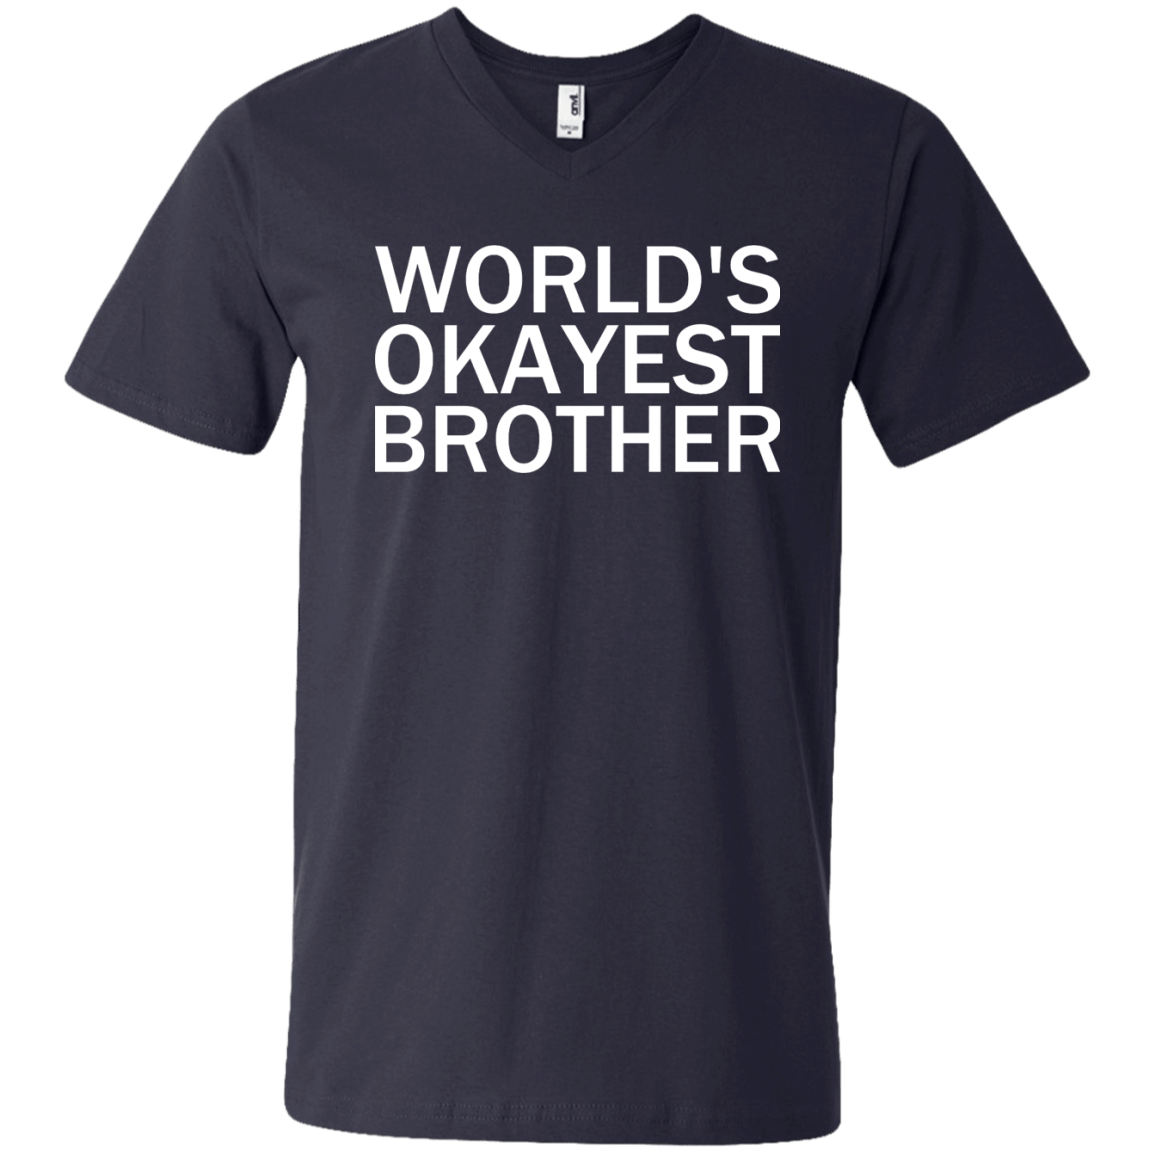 World's Okayest Brother - Engineering Outfitters